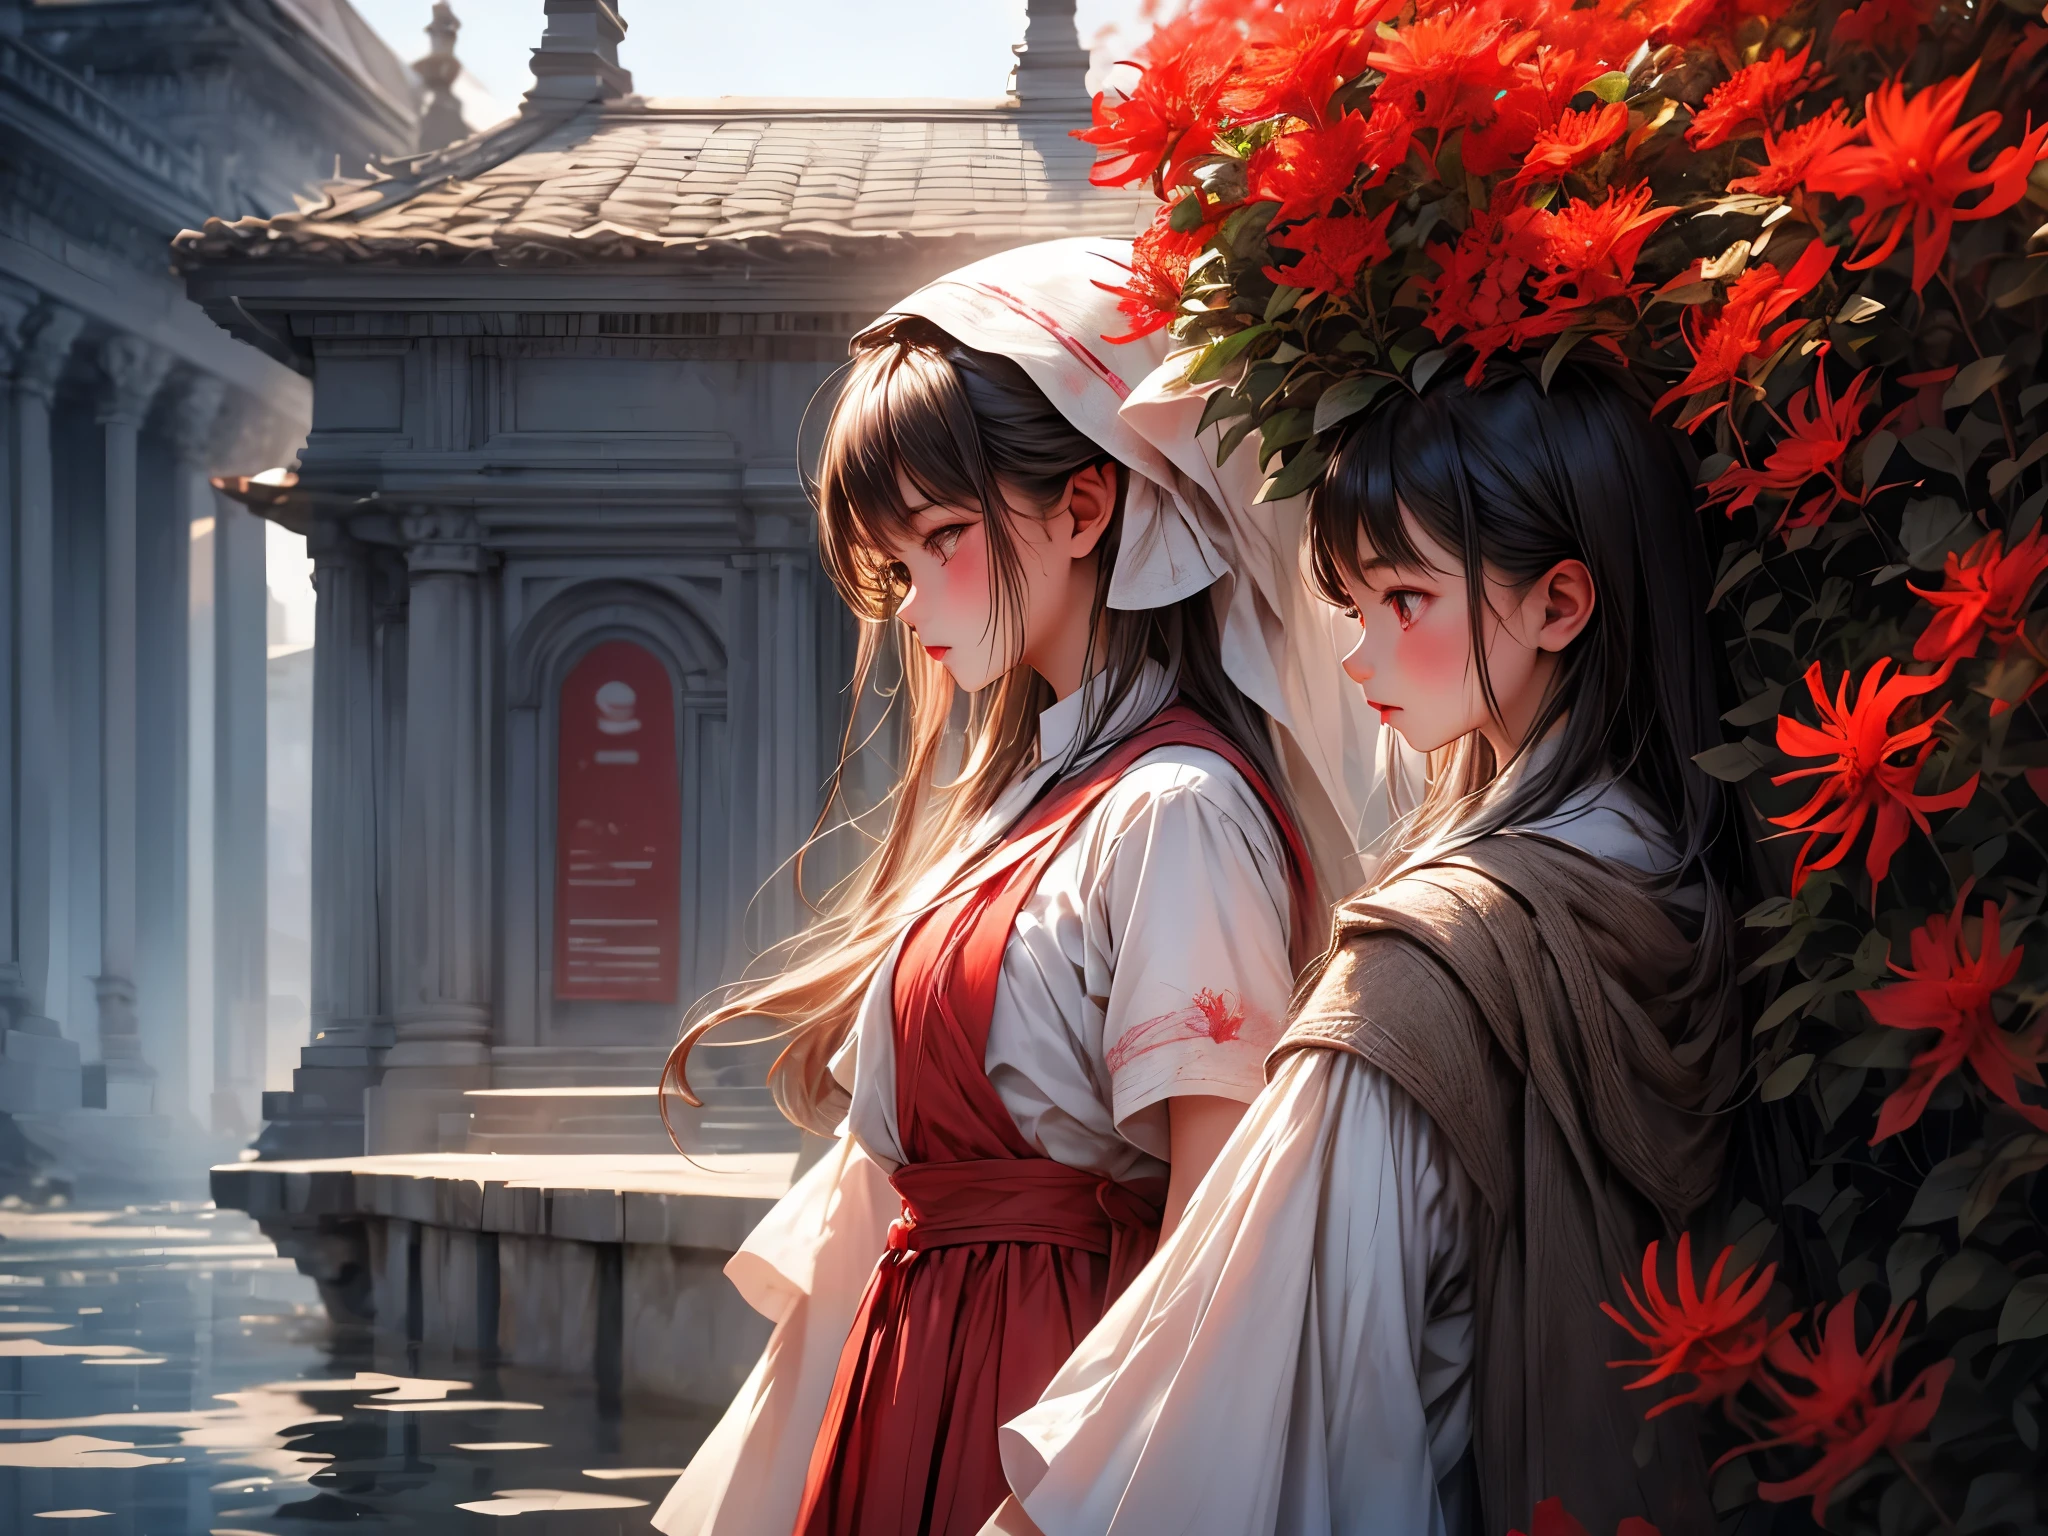 best quality, ultra-detailed, photorealistic, blood-red spider lilies blooms by the riverside,10-year-old girl stands at the bank of the SANZU, wearing white clothes, ominous ferryman between the realm of the living and the dead, uncanny boatman